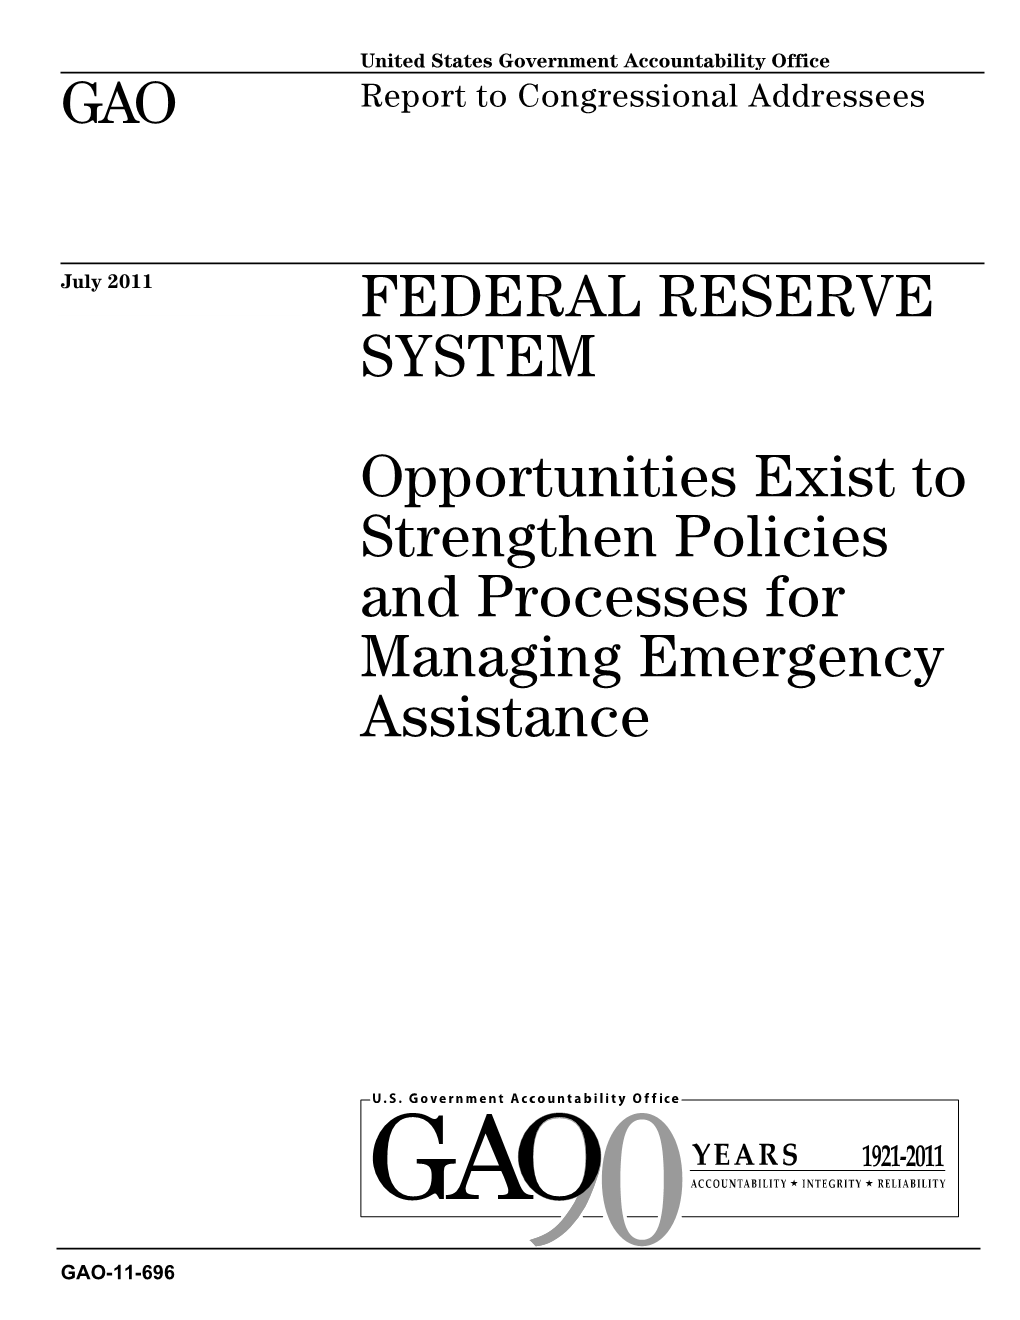 GAO-11-696 Federal Reserve System